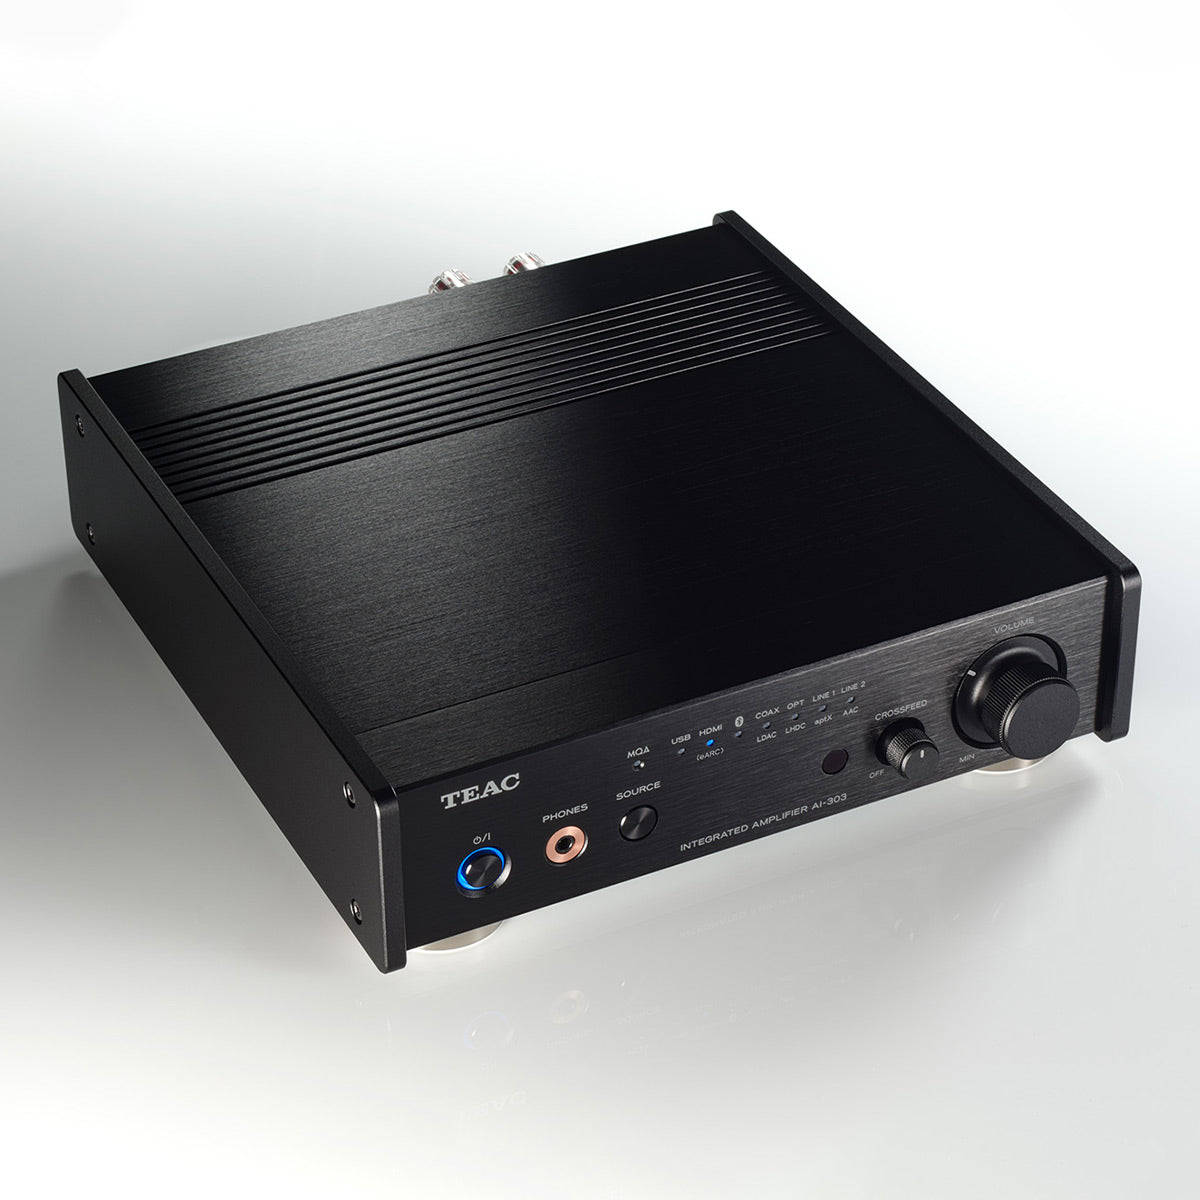 TEAC AI-303 Integrated Amplifier with Built-In DAC, eARC, MQA Decoding, and Headphone Amplifier